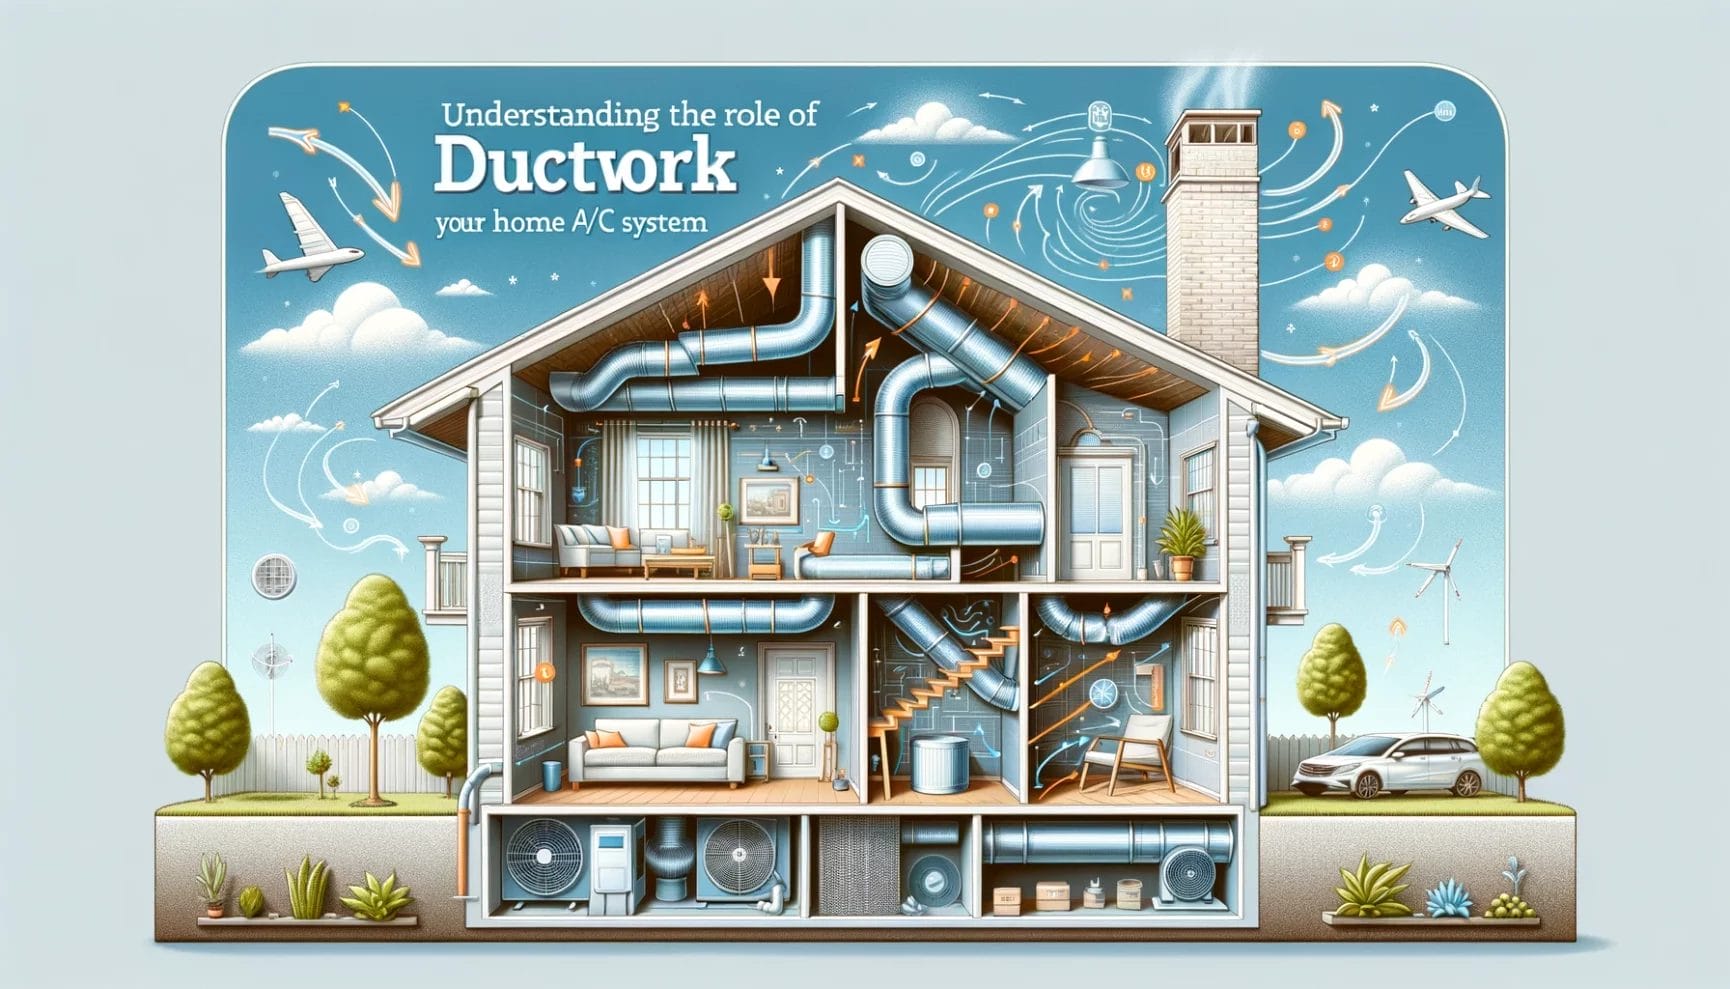 Cross-sectional illustration of a home showcasing the ductwork system of a residential air conditioning system.